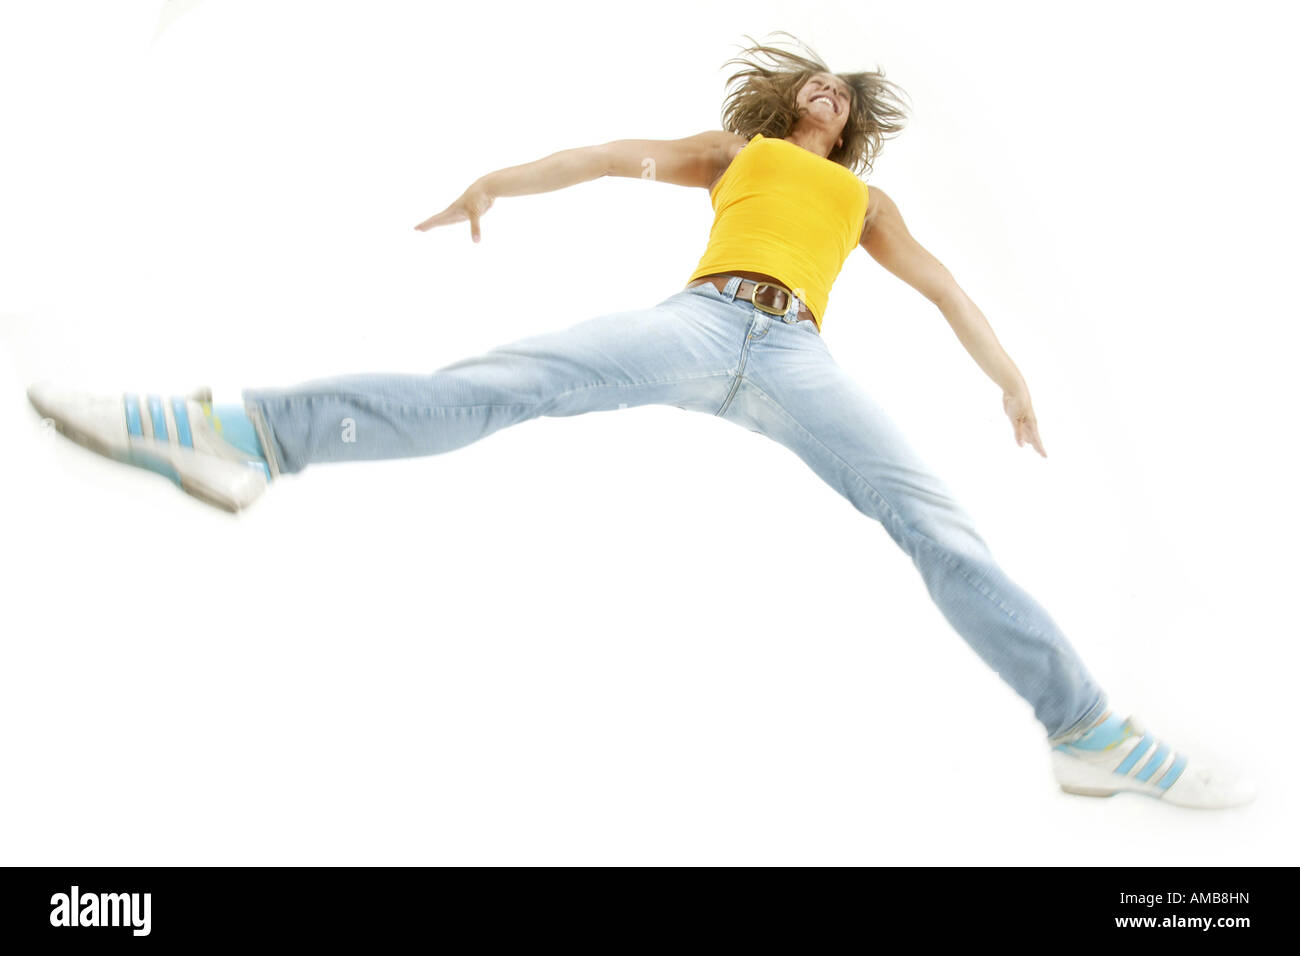 young woman jumping in the air Stock Photo